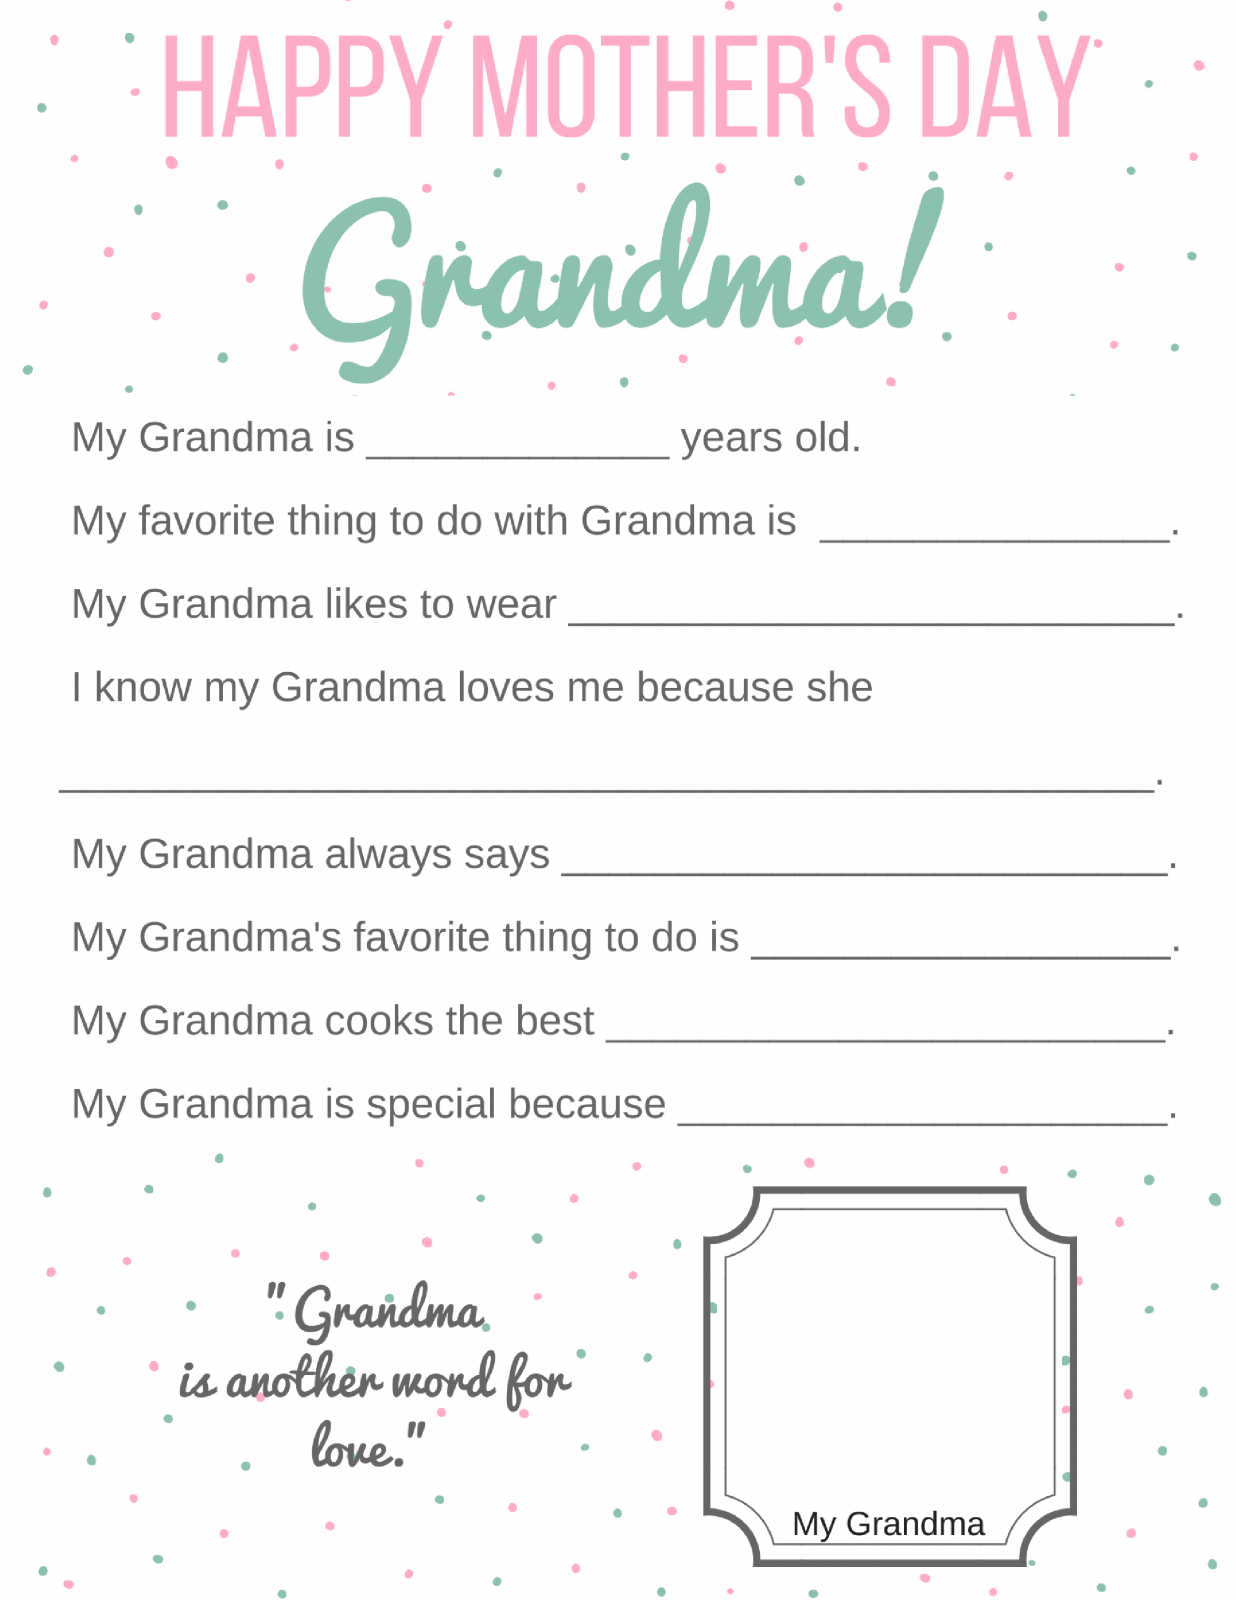 Free Printable Mothers Day Cards For Grandma